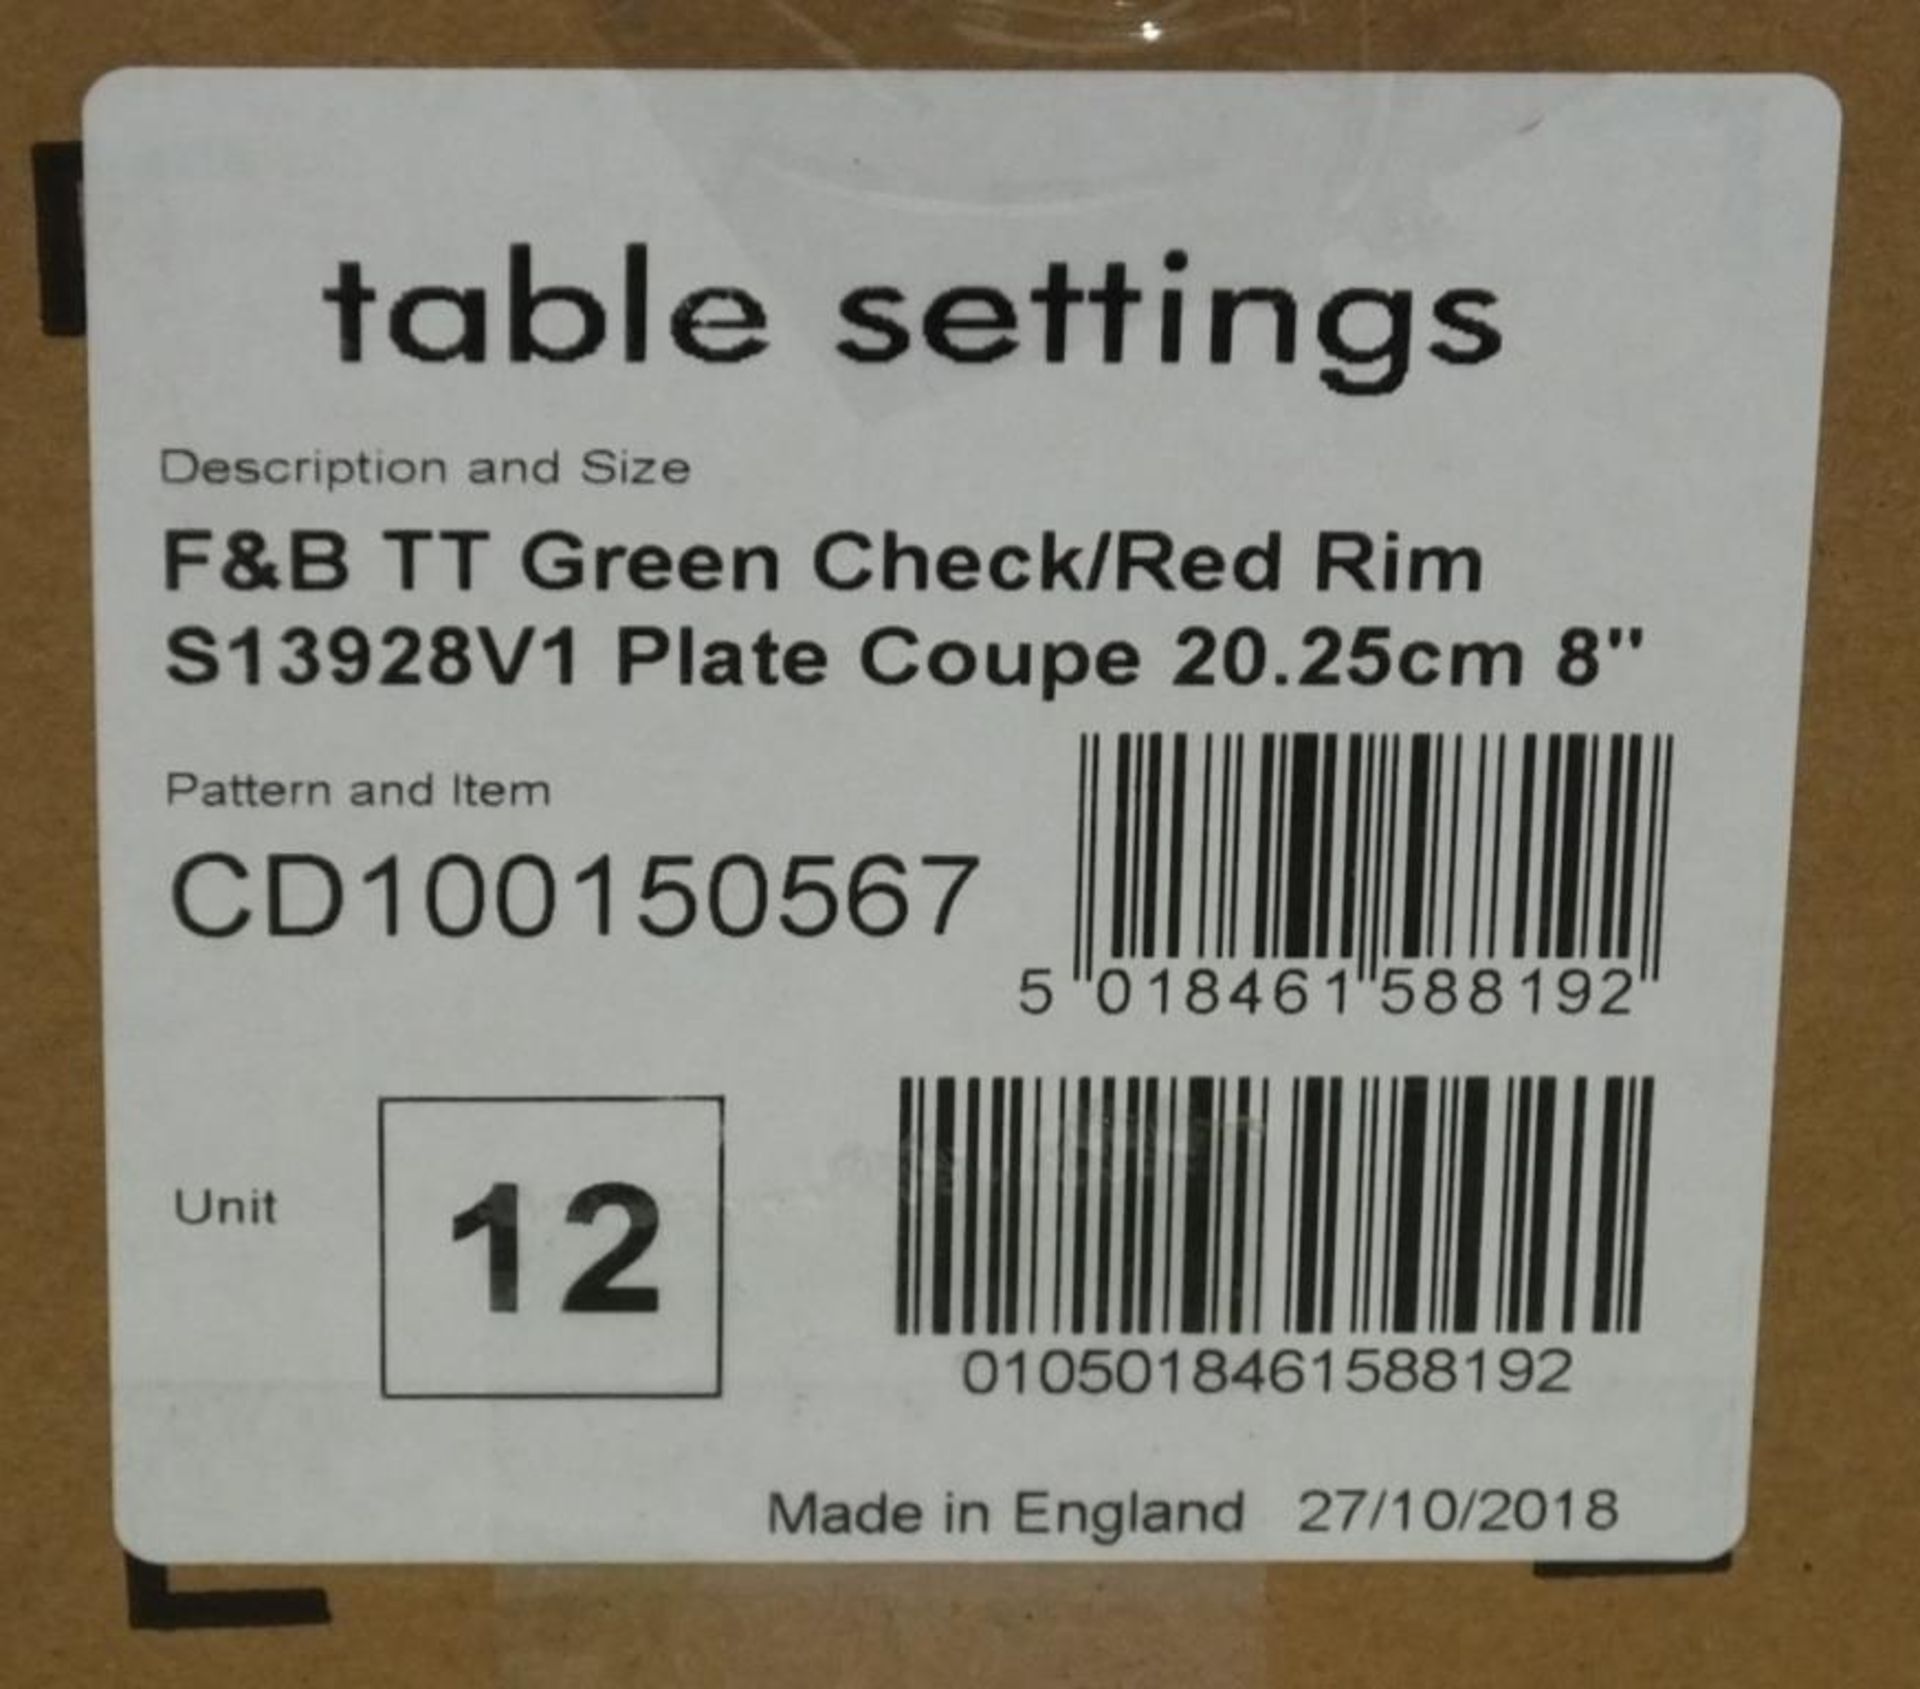 Steelite table setting plates - Green Check/Red Rim Plate Coupe 20.25cm / 8 in - 12 per box 5 boxes - Image 4 of 5